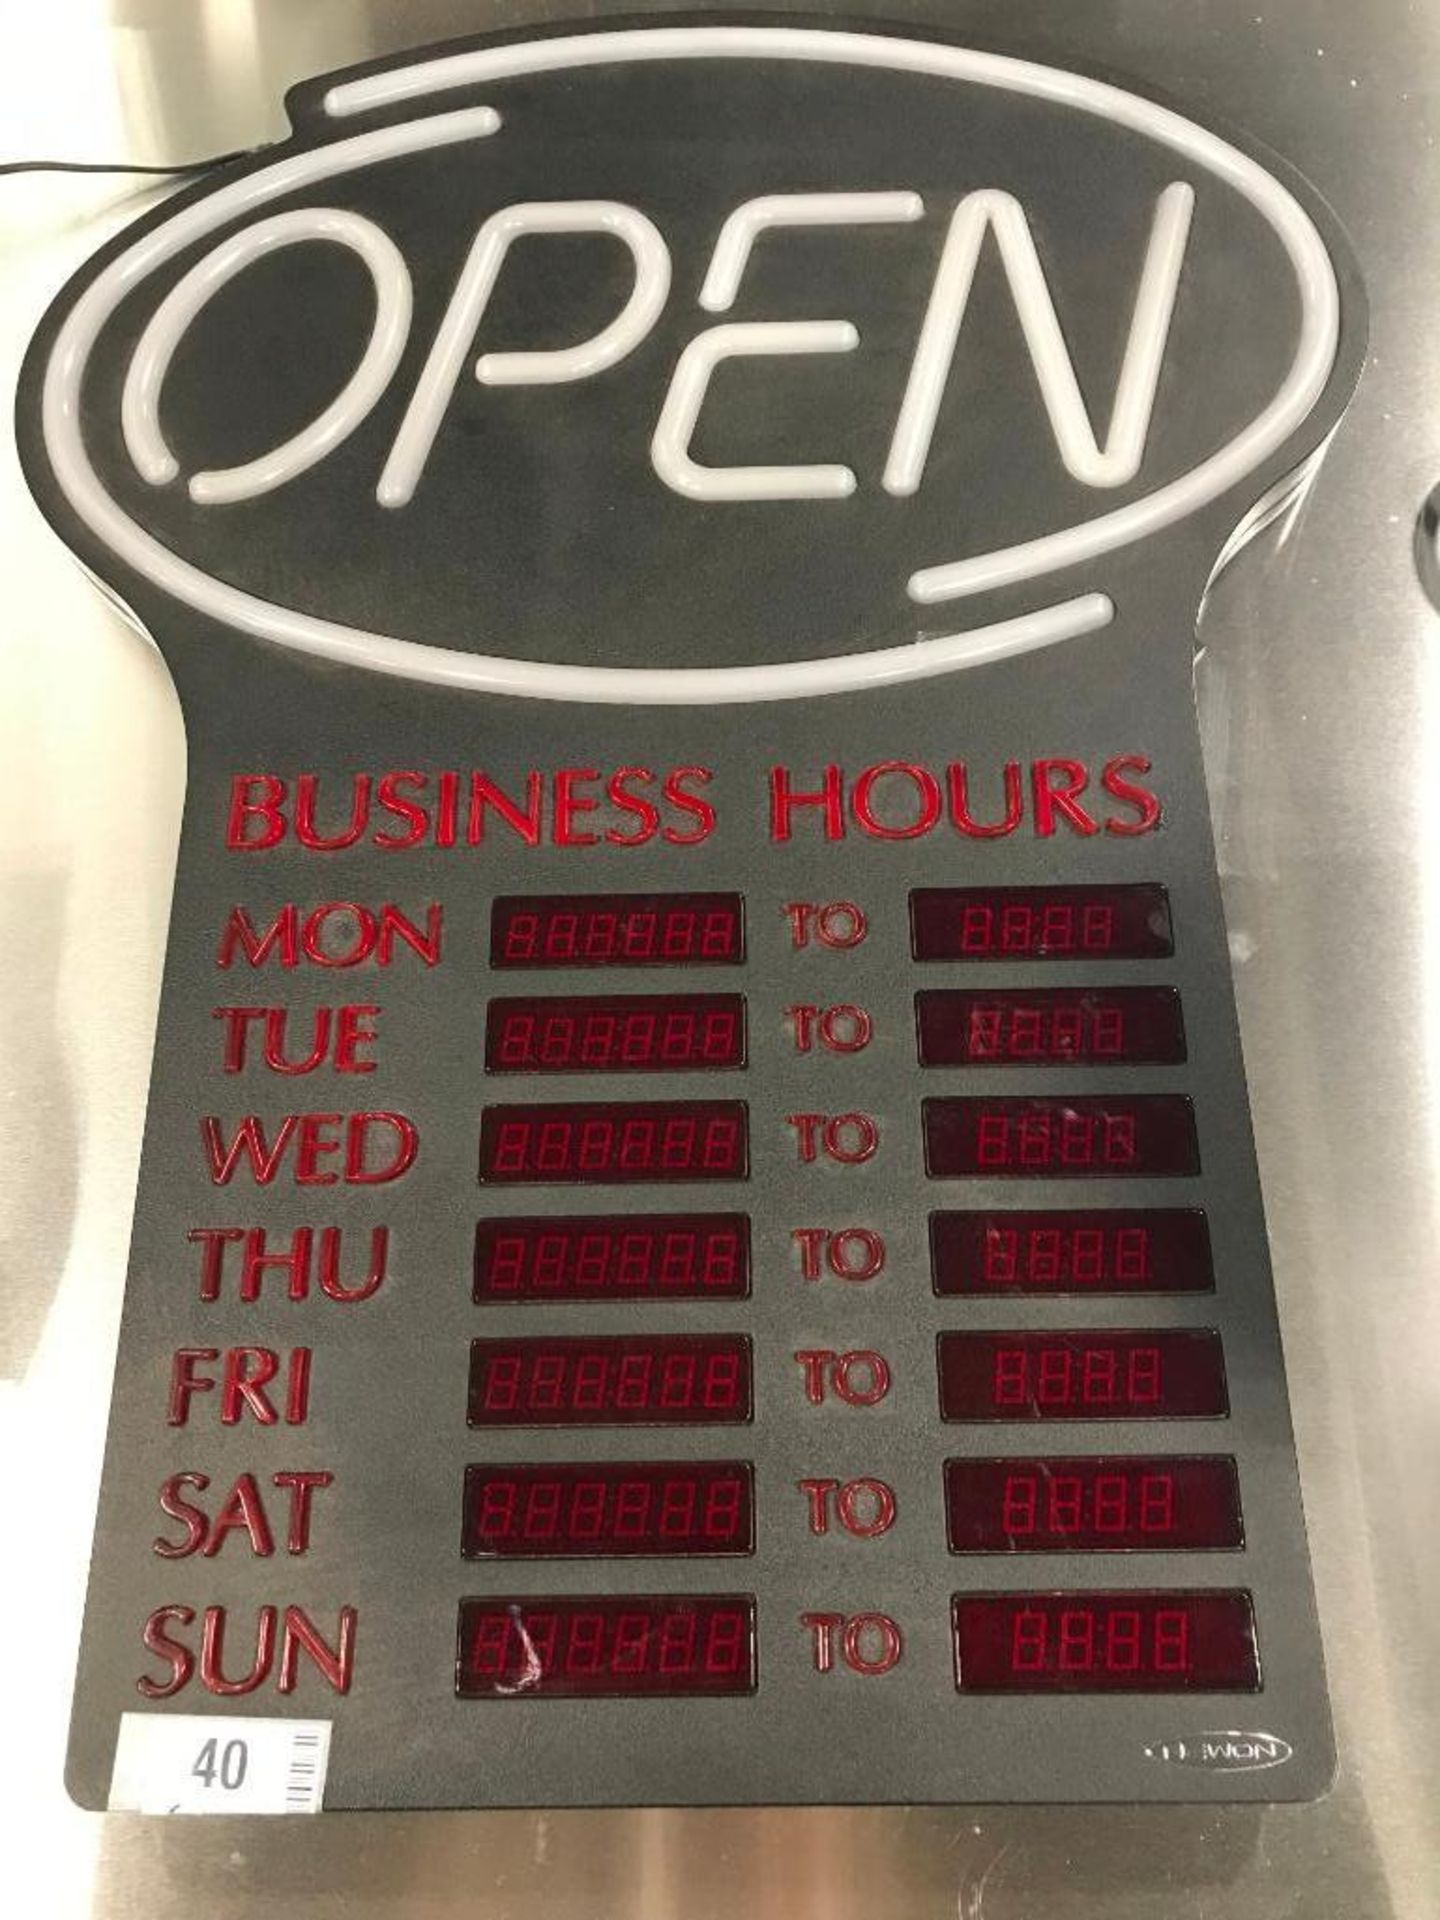 NEWON LED OPEN SIGN WITH PROGRAMMABLE BUSINESS HOURS AND FLASHING EFFECTS - Image 8 of 8